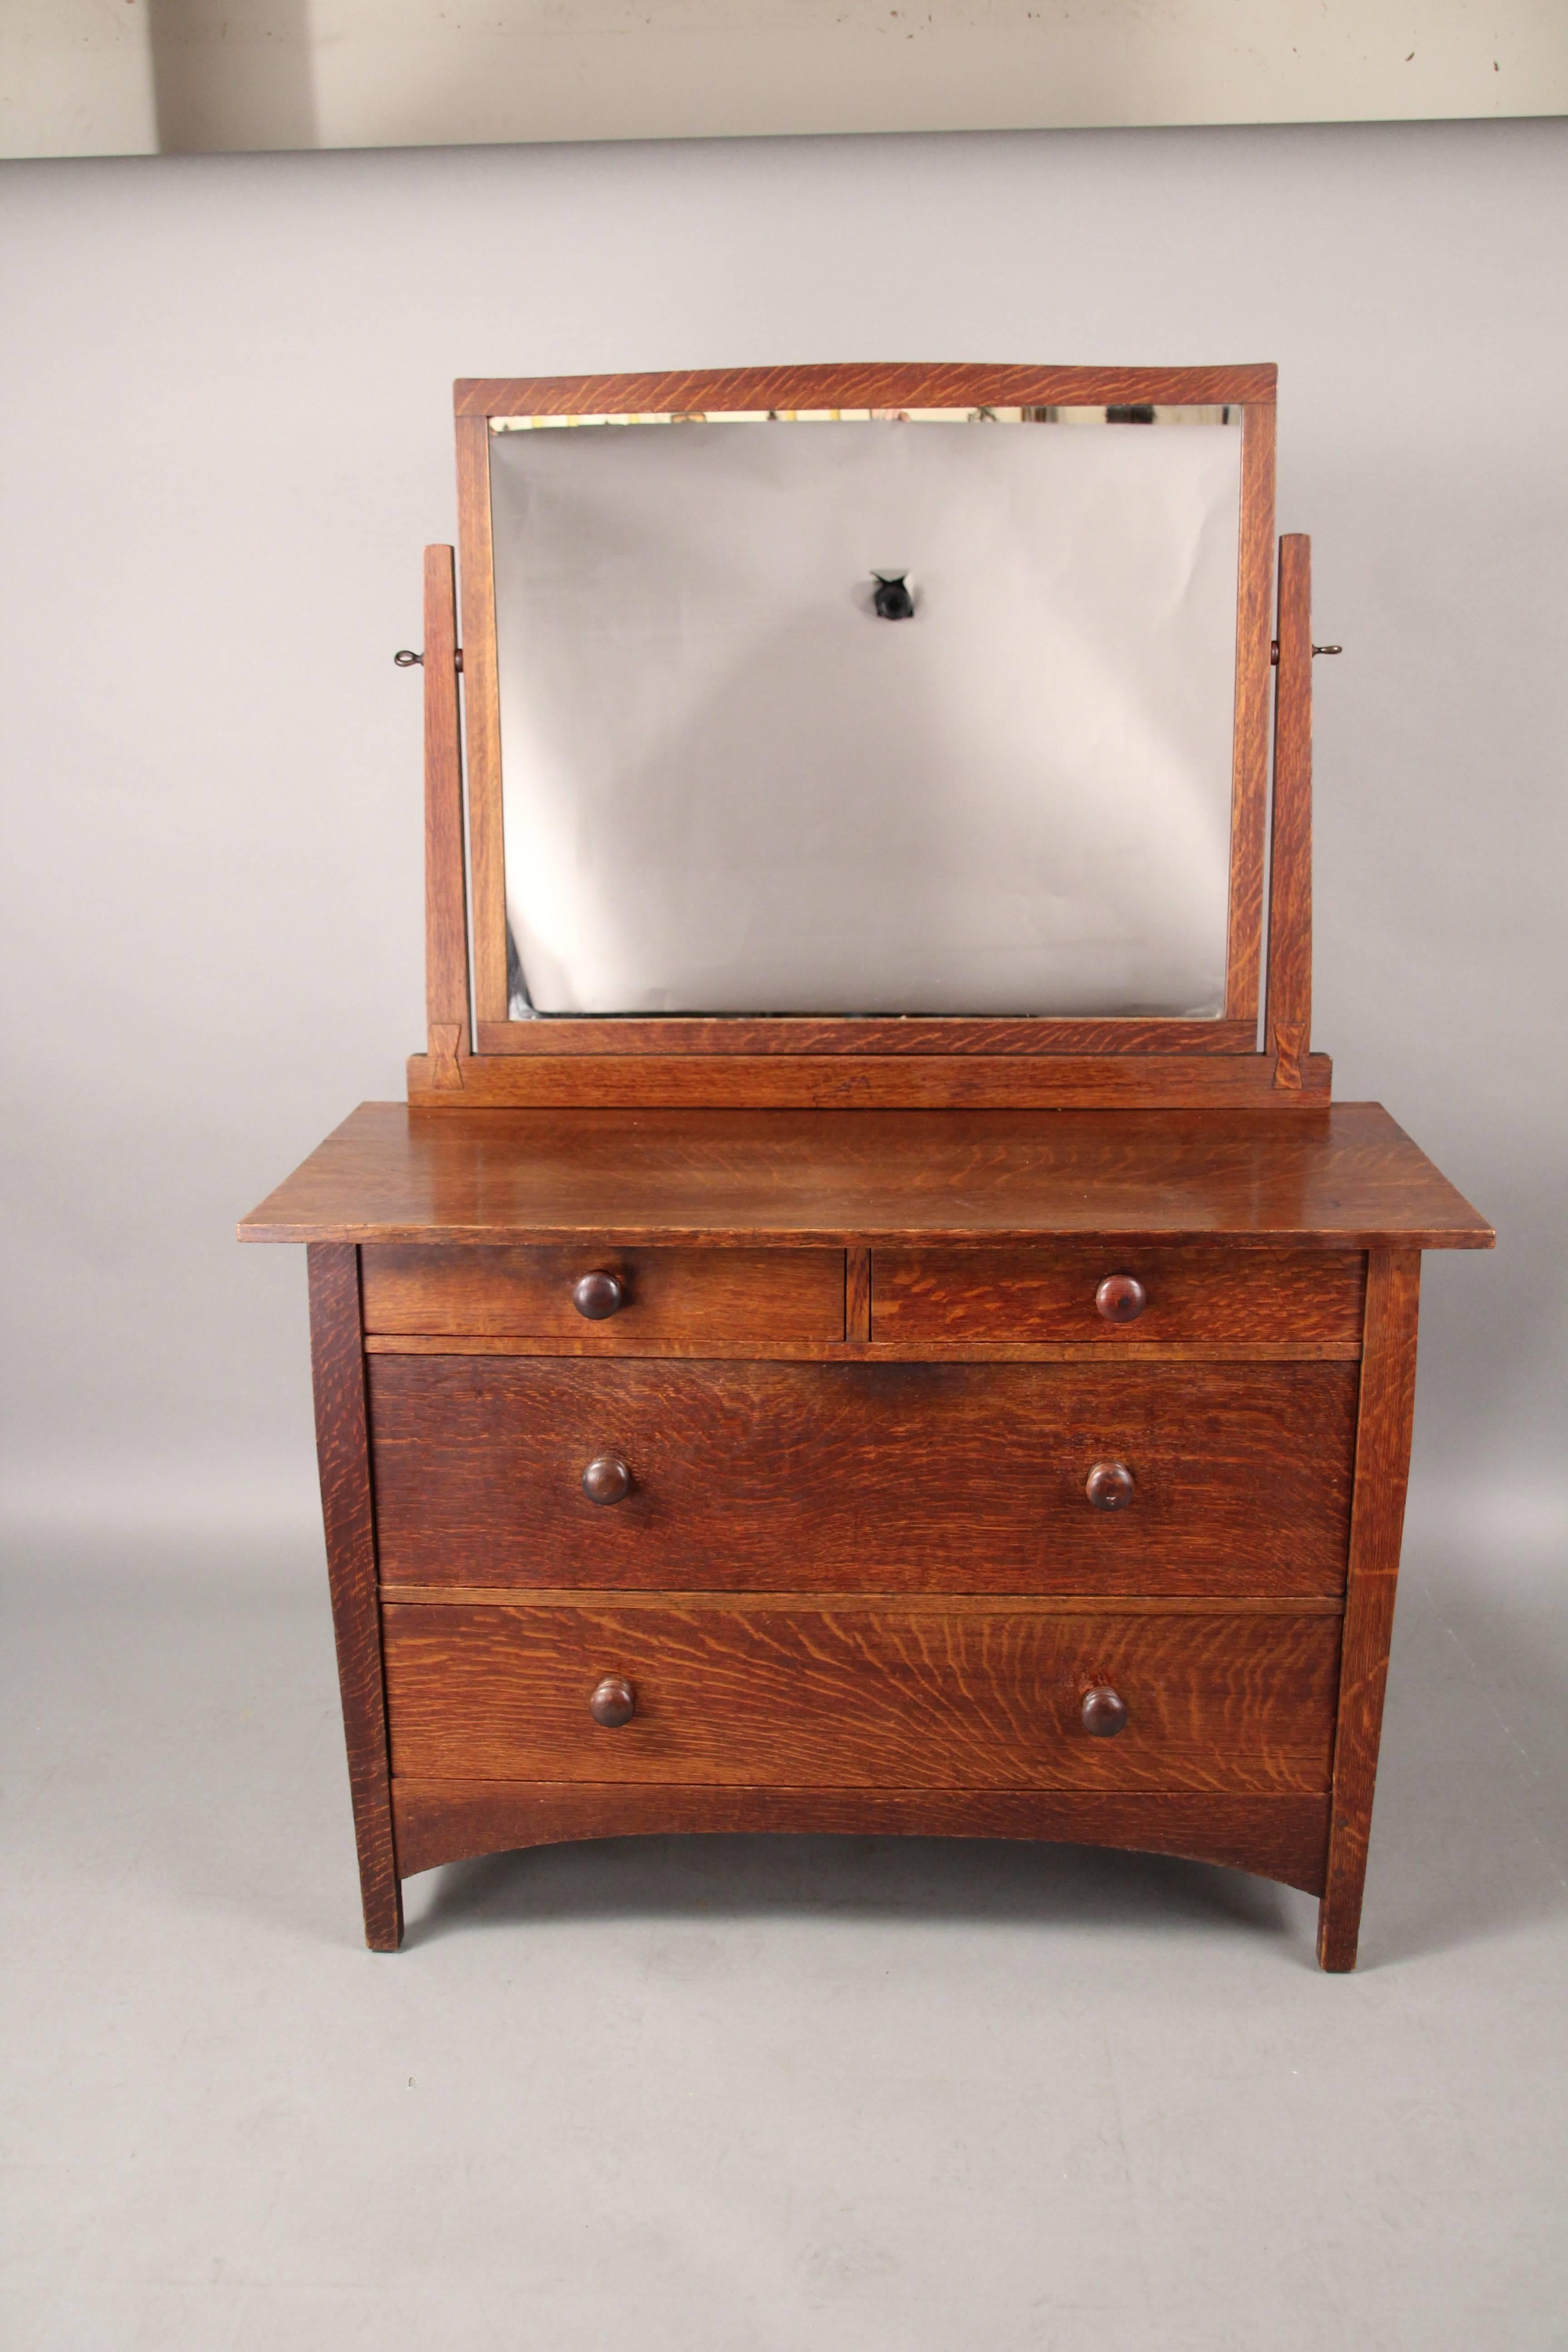 Dresser with mirror with original paper label. Good finish with minor wear.